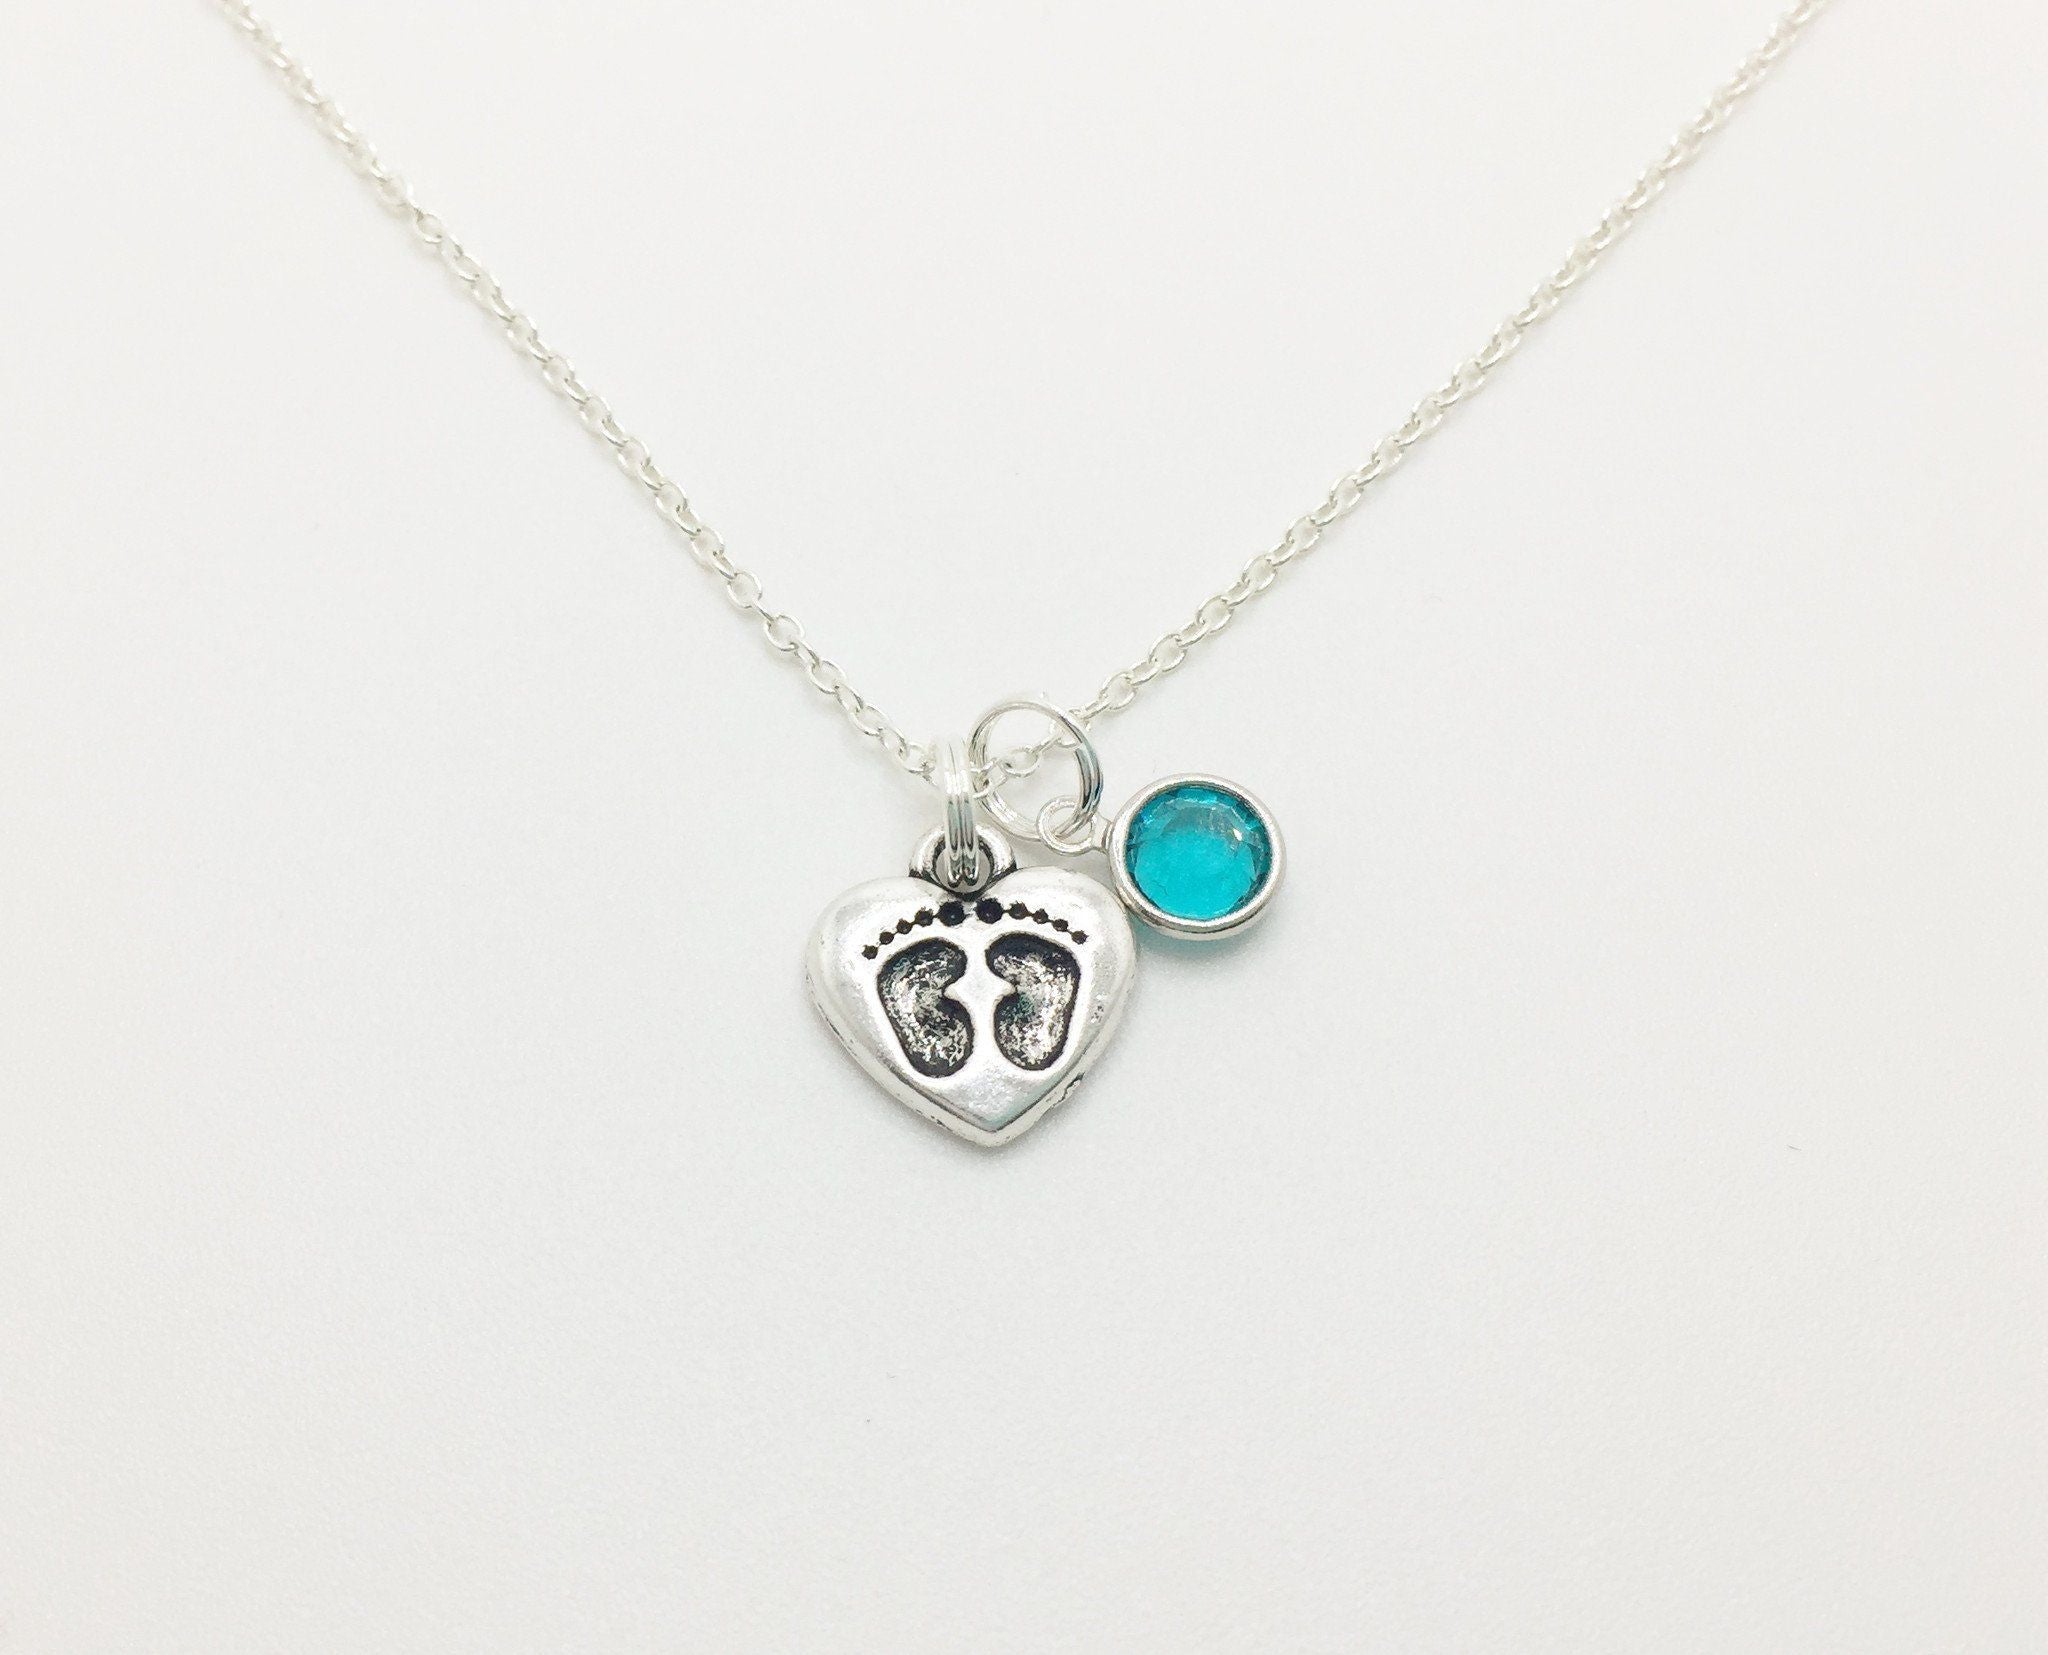 Baby Foot Prints Necklace Personalized with Swarovski Birthstone - Anomaly Creations & Designs